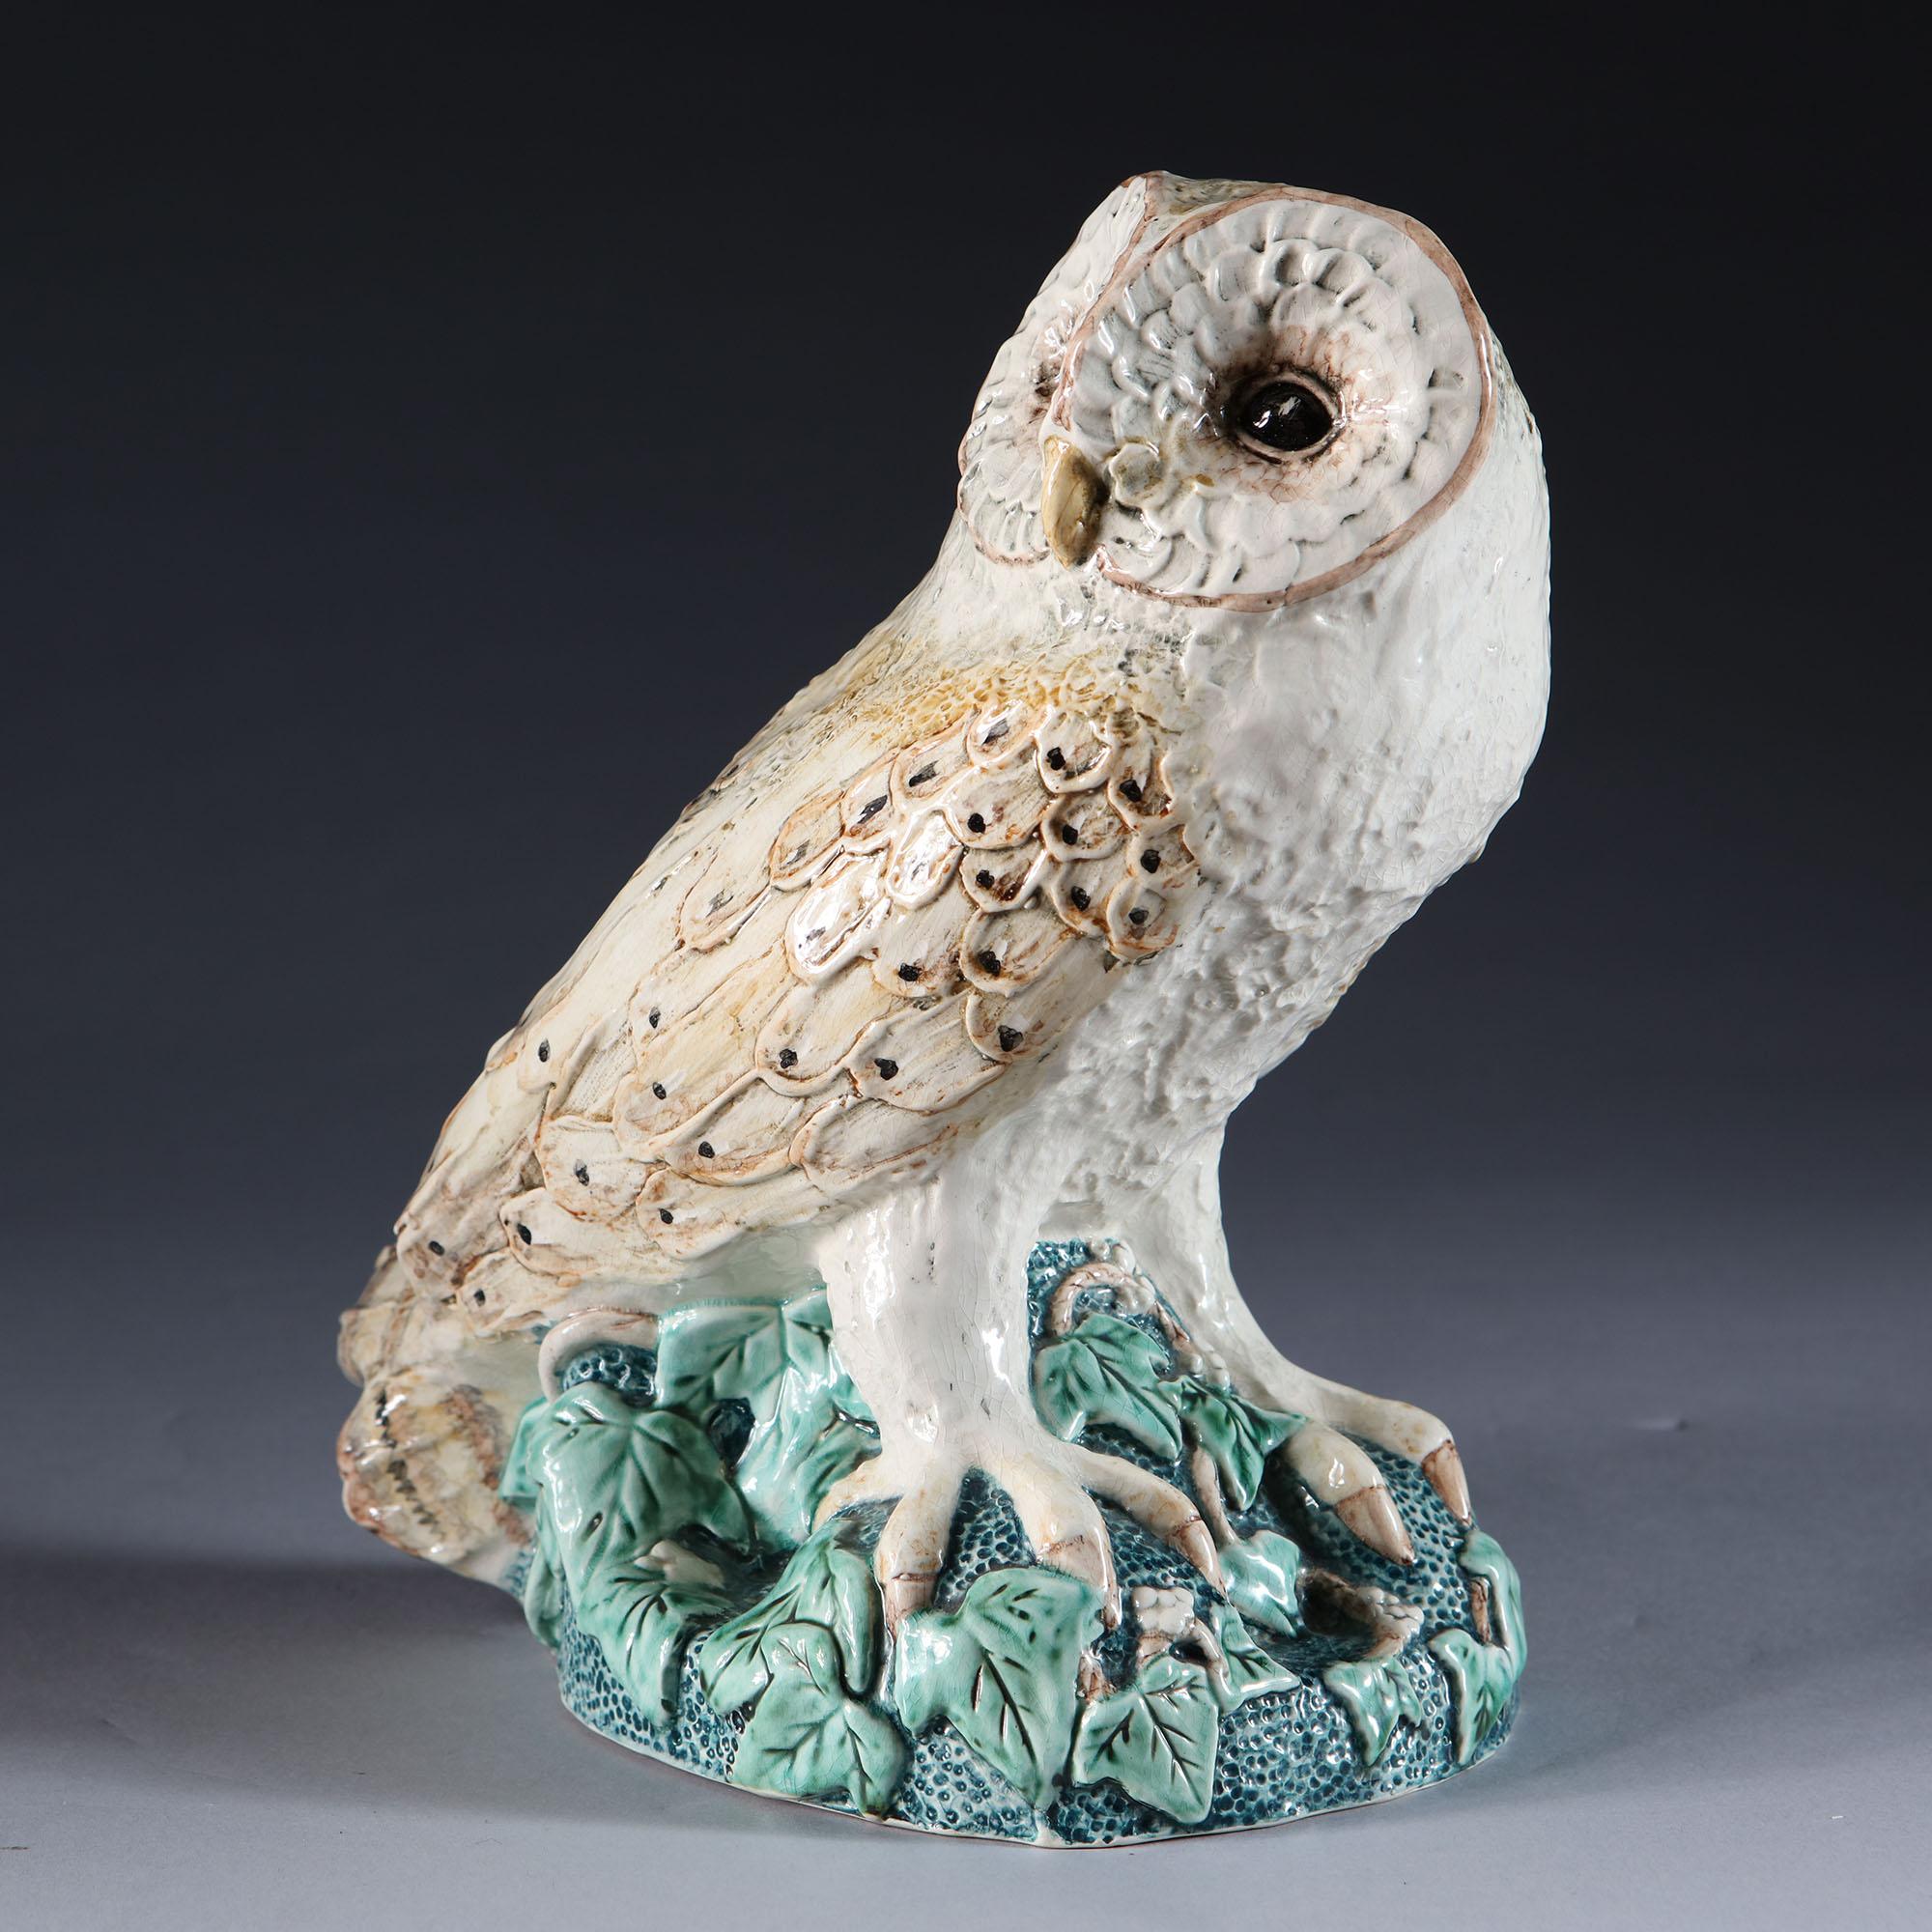 An unusual realistically modelled art pottery barn owl perching on a leafy outcrop. By Margaret Howard.

Margaret Howard was a potter based in St Ives, she produced one off pottery groups for Fortnum & Mason and for collectors and enthusiasts over